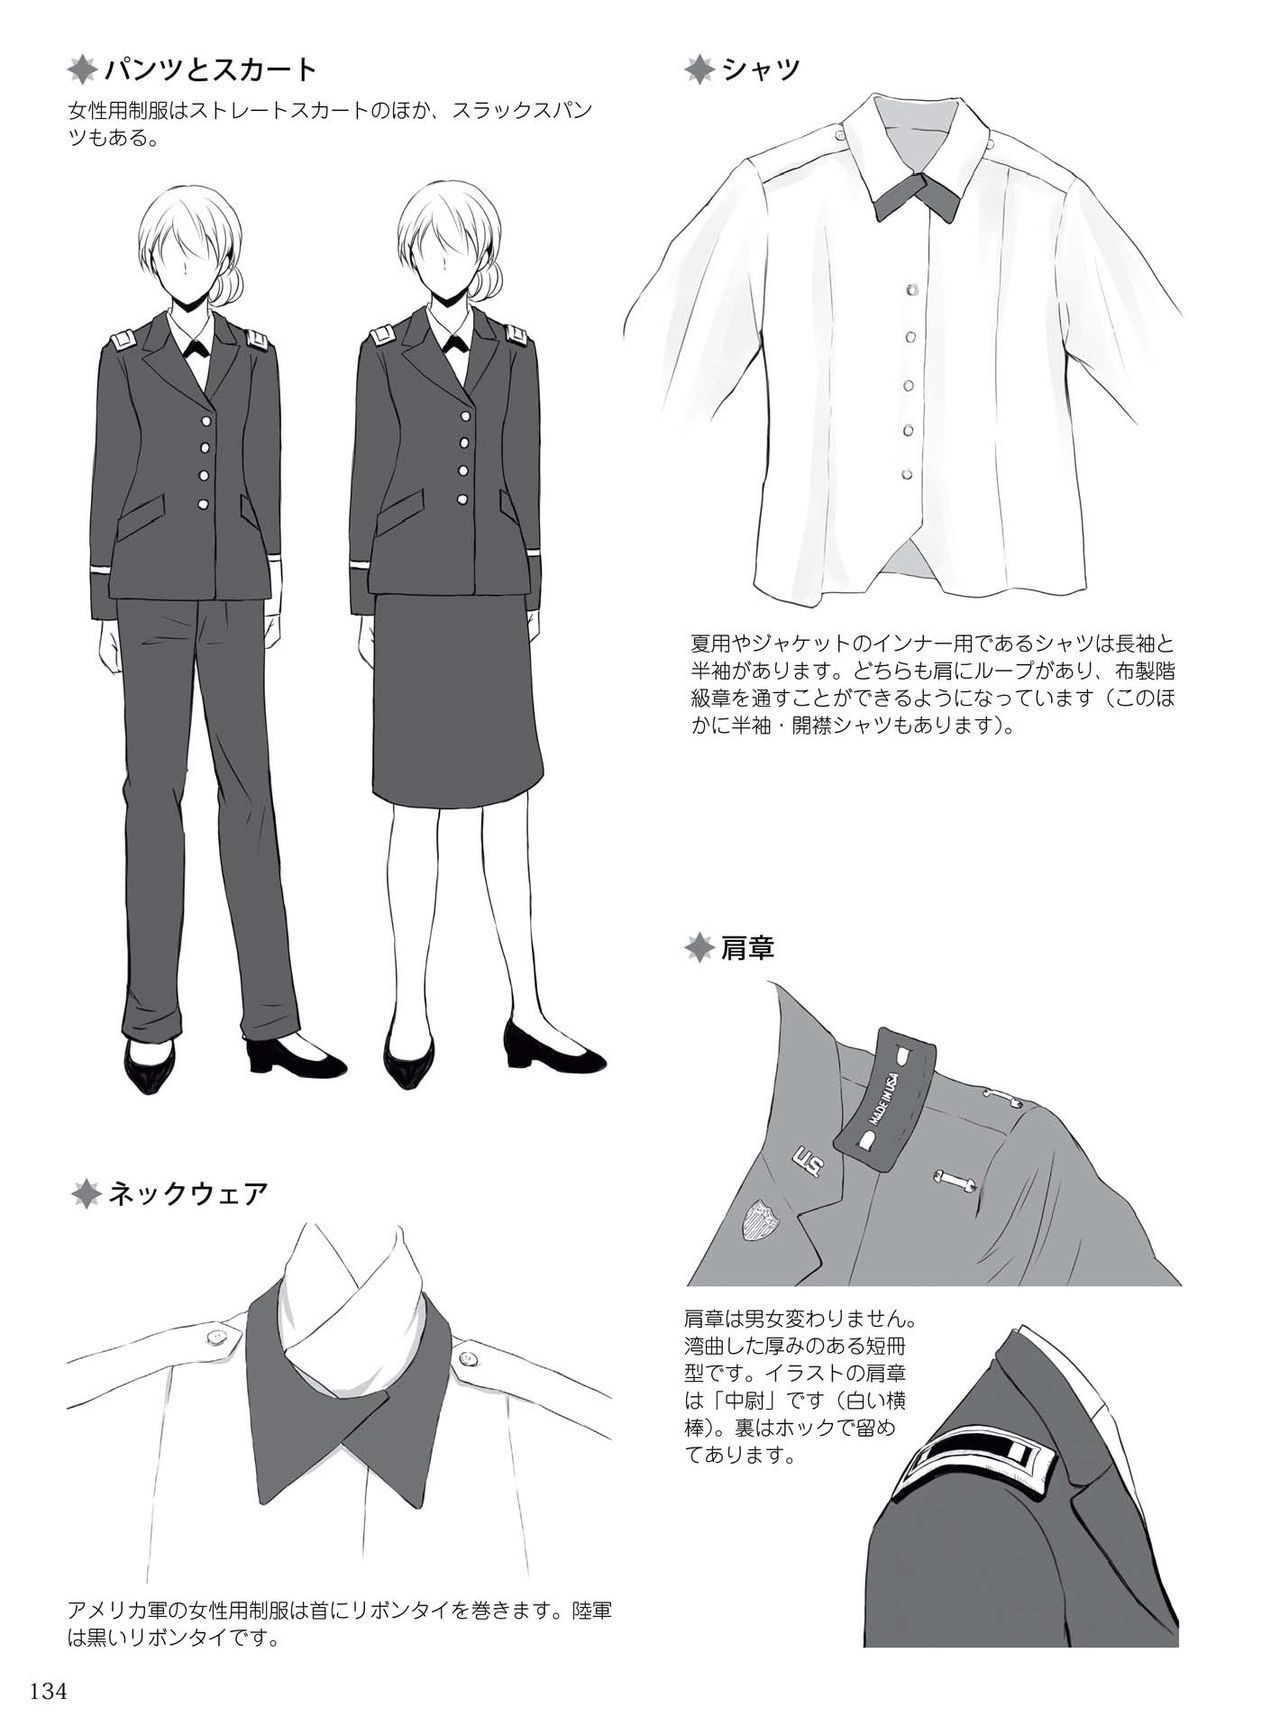 How to draw military uniforms and uniforms From Self-Defense Forces 軍服・制服の描き方 アメリカ軍・自衛隊の制服から戦闘服まで 137